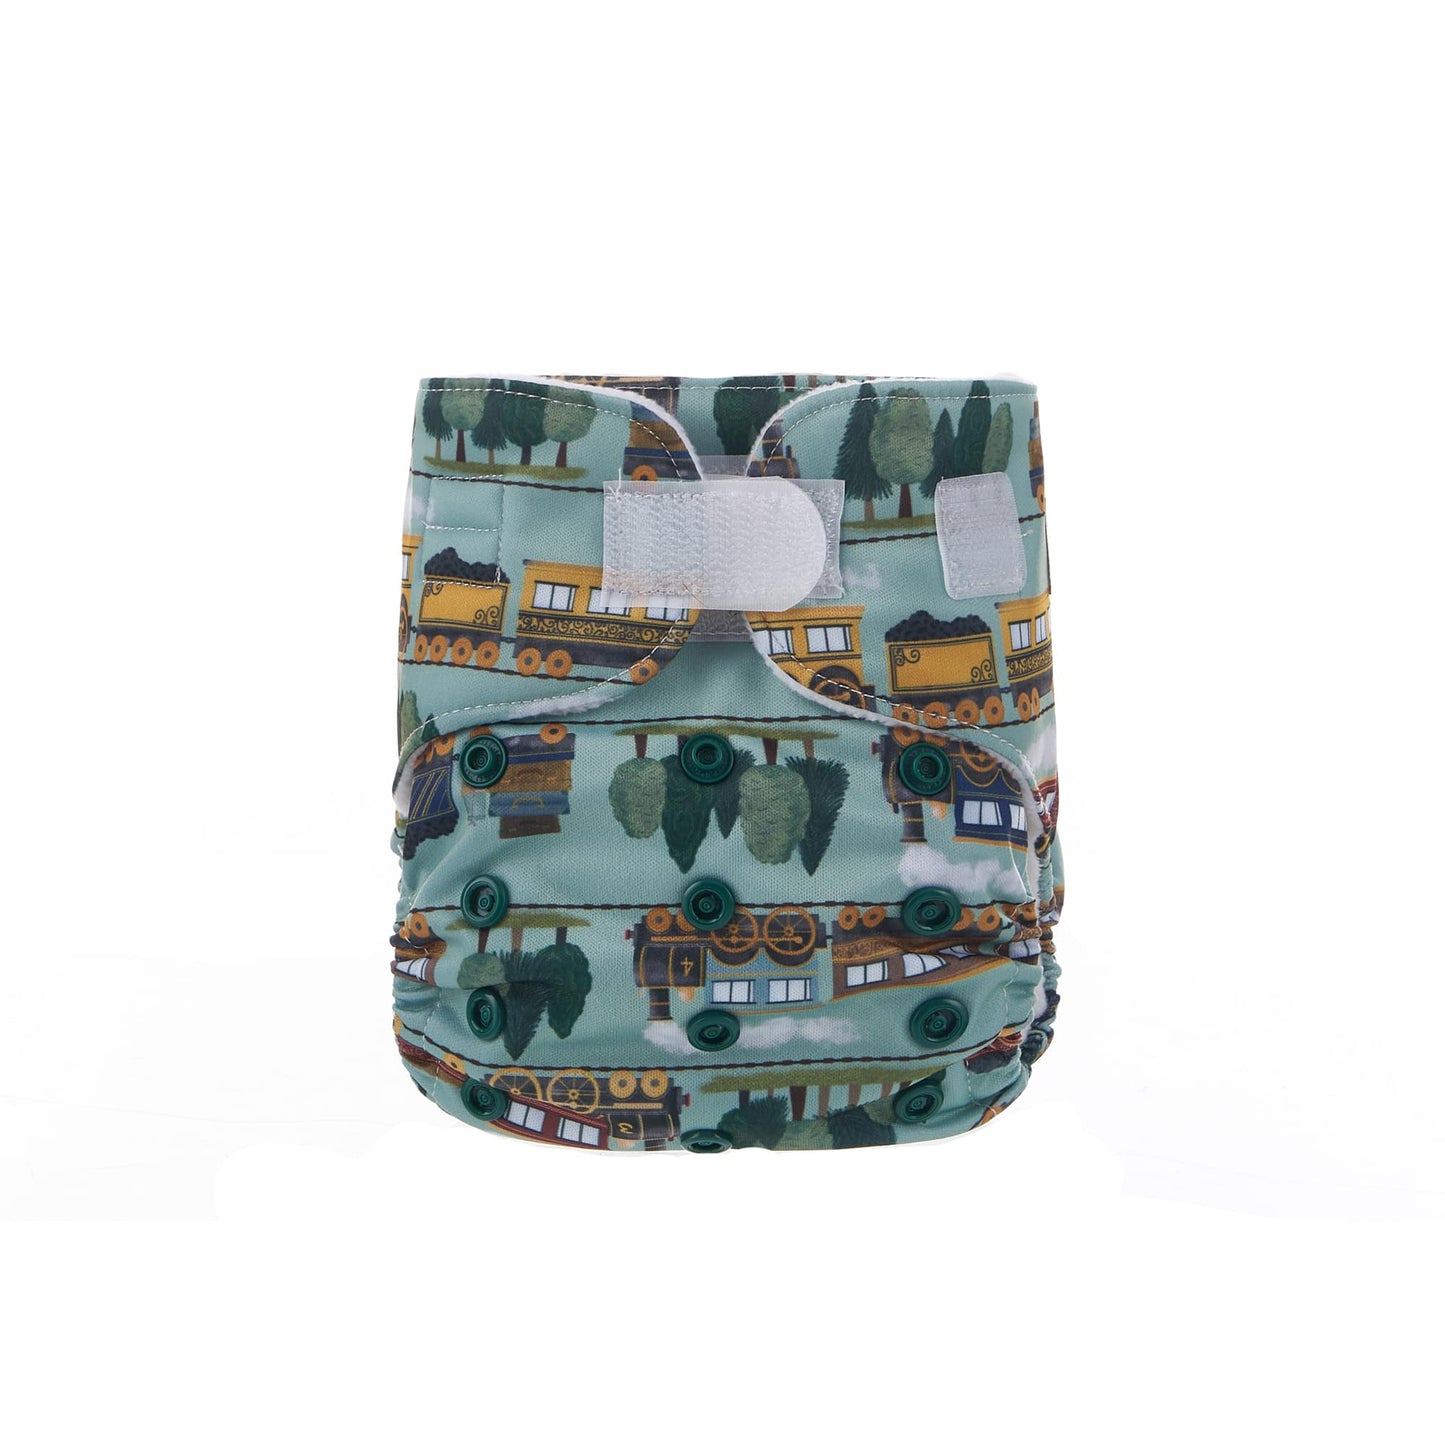 Newborn nappy with velcro fastening and a train pattern.